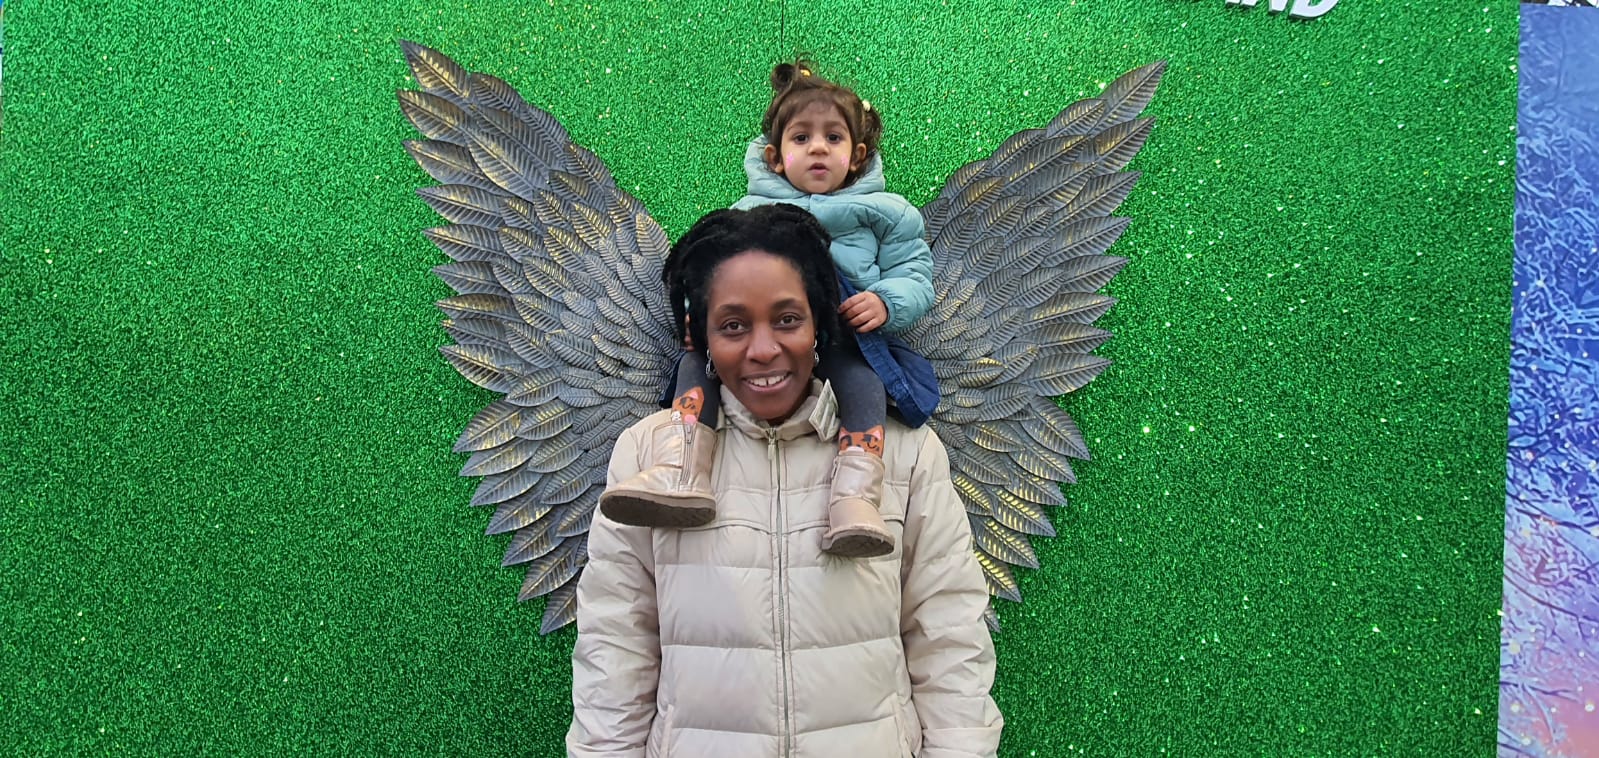 A black woman with a toddler waring a white winter jacket and standing against a green background